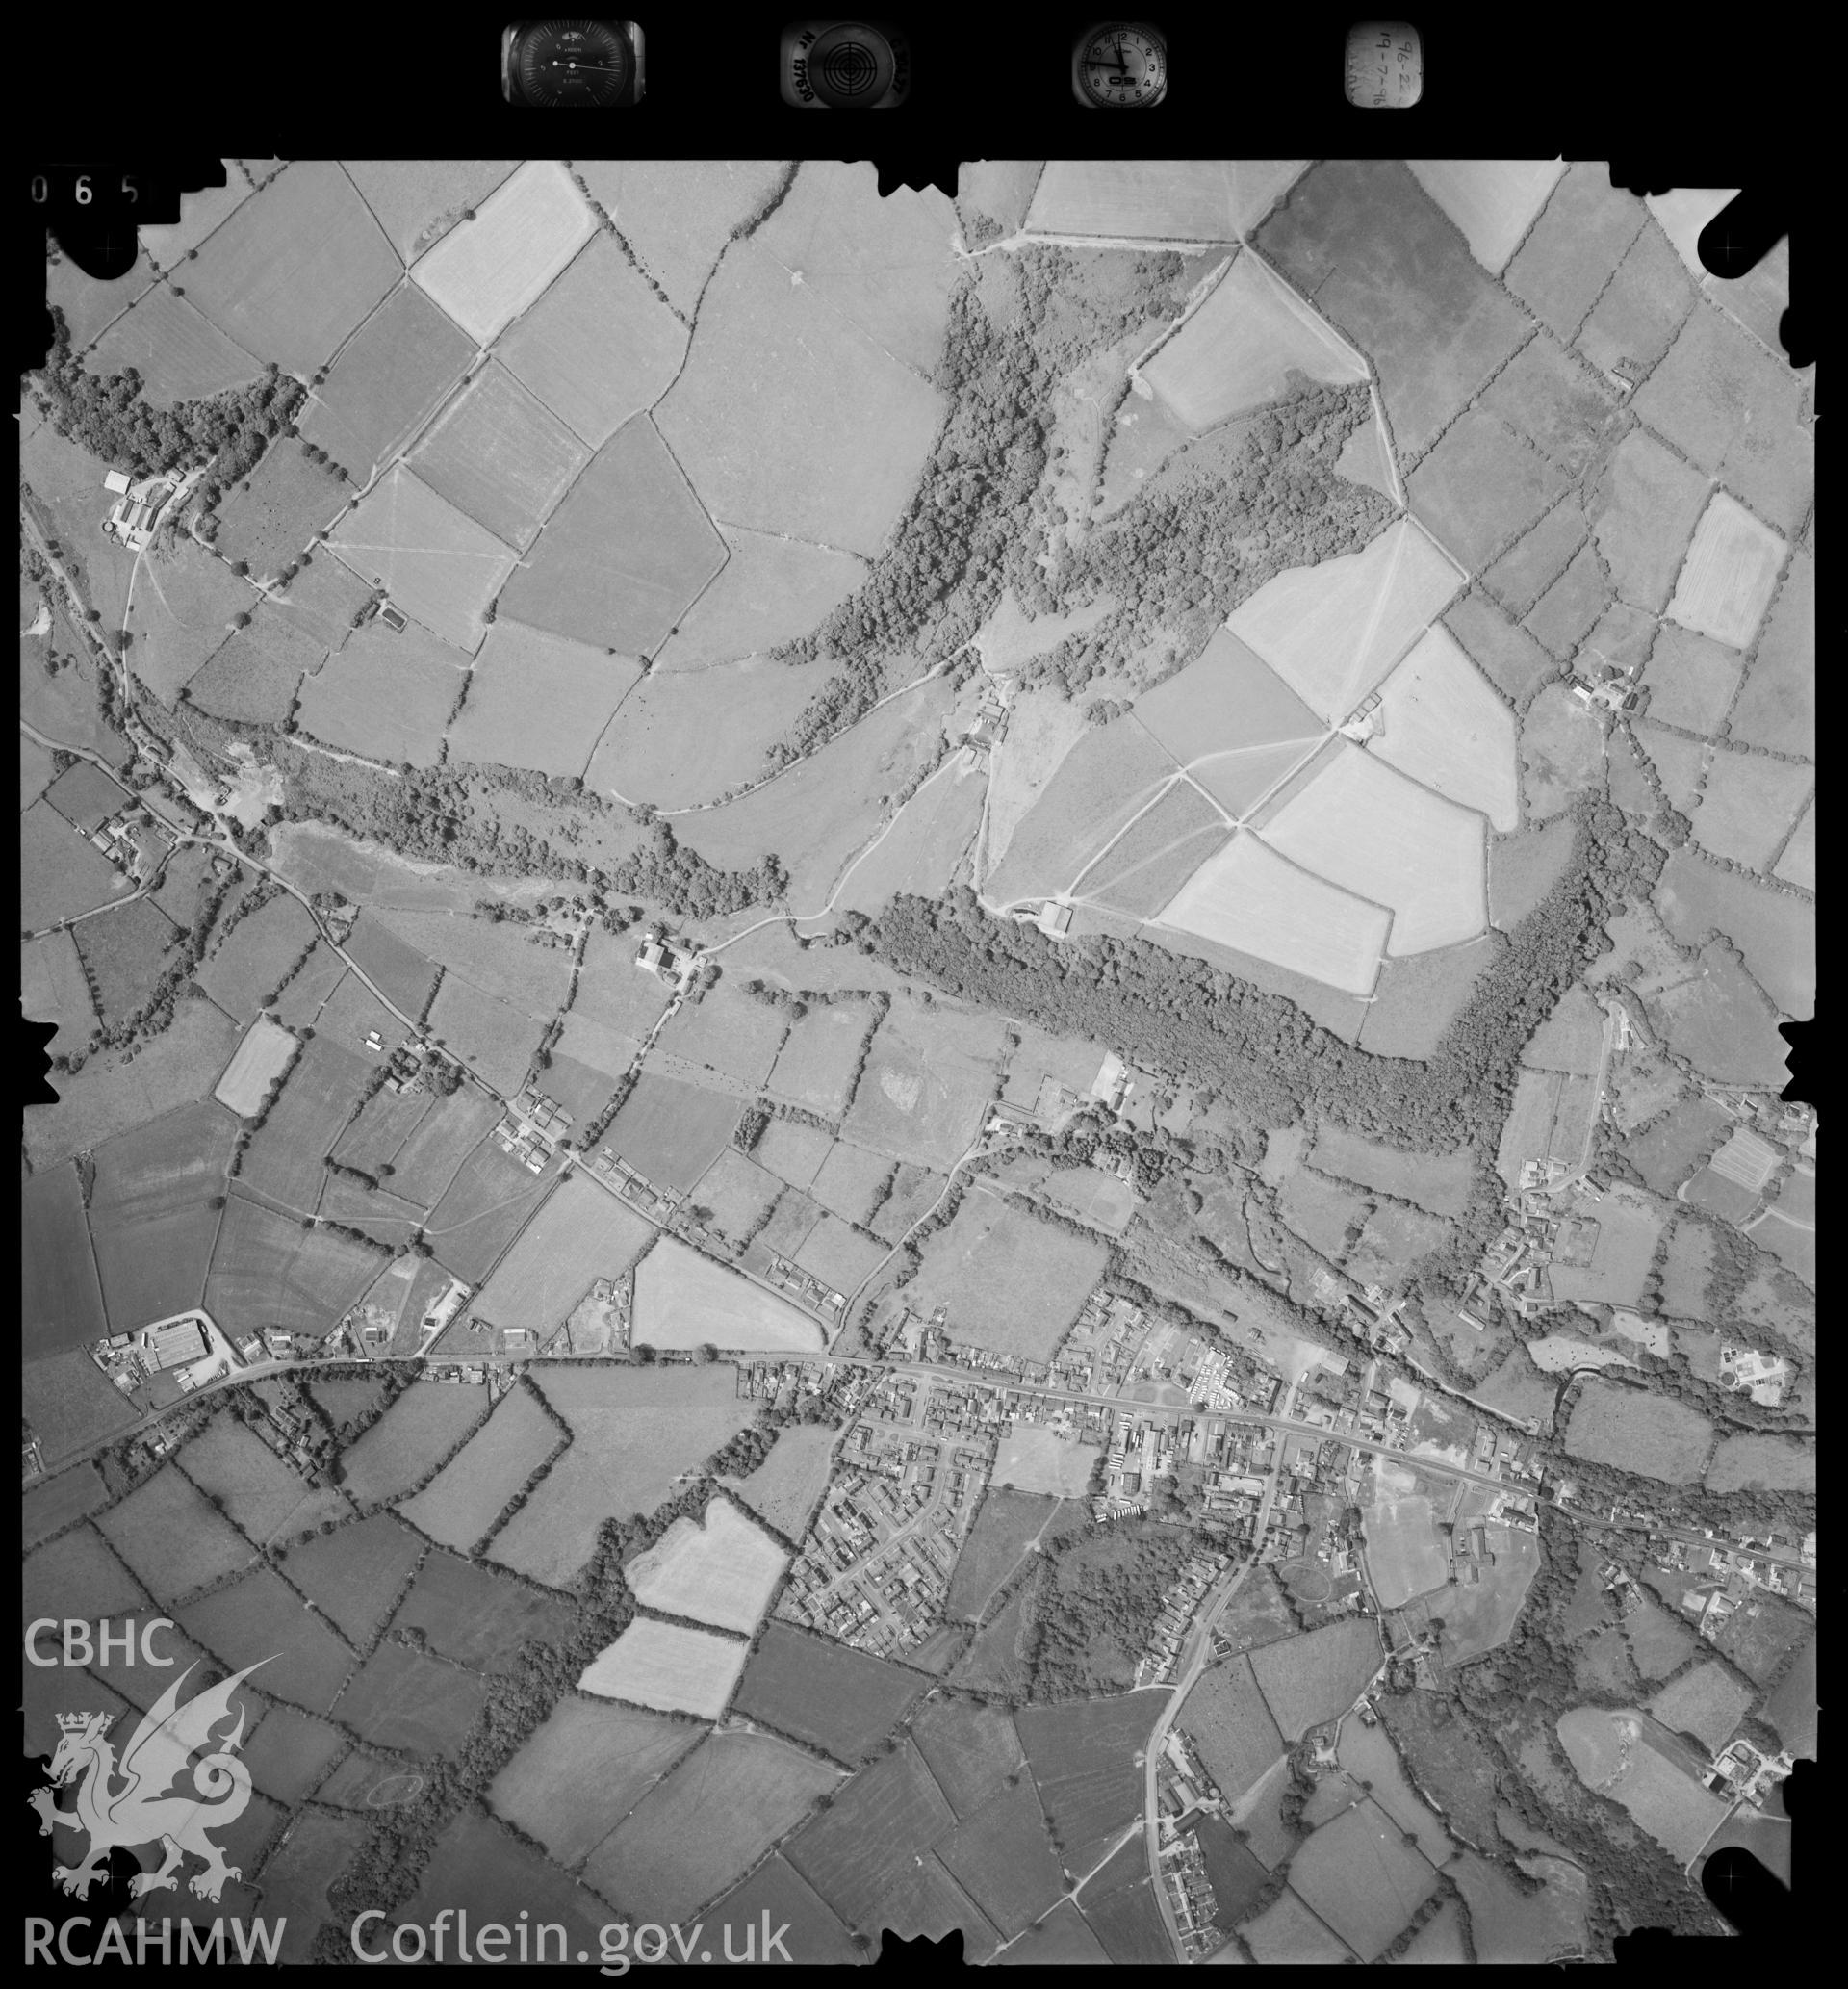 Digitized copy of an aerial photograph showing the Pencader area, taken by Ordnance Survey, 1996.